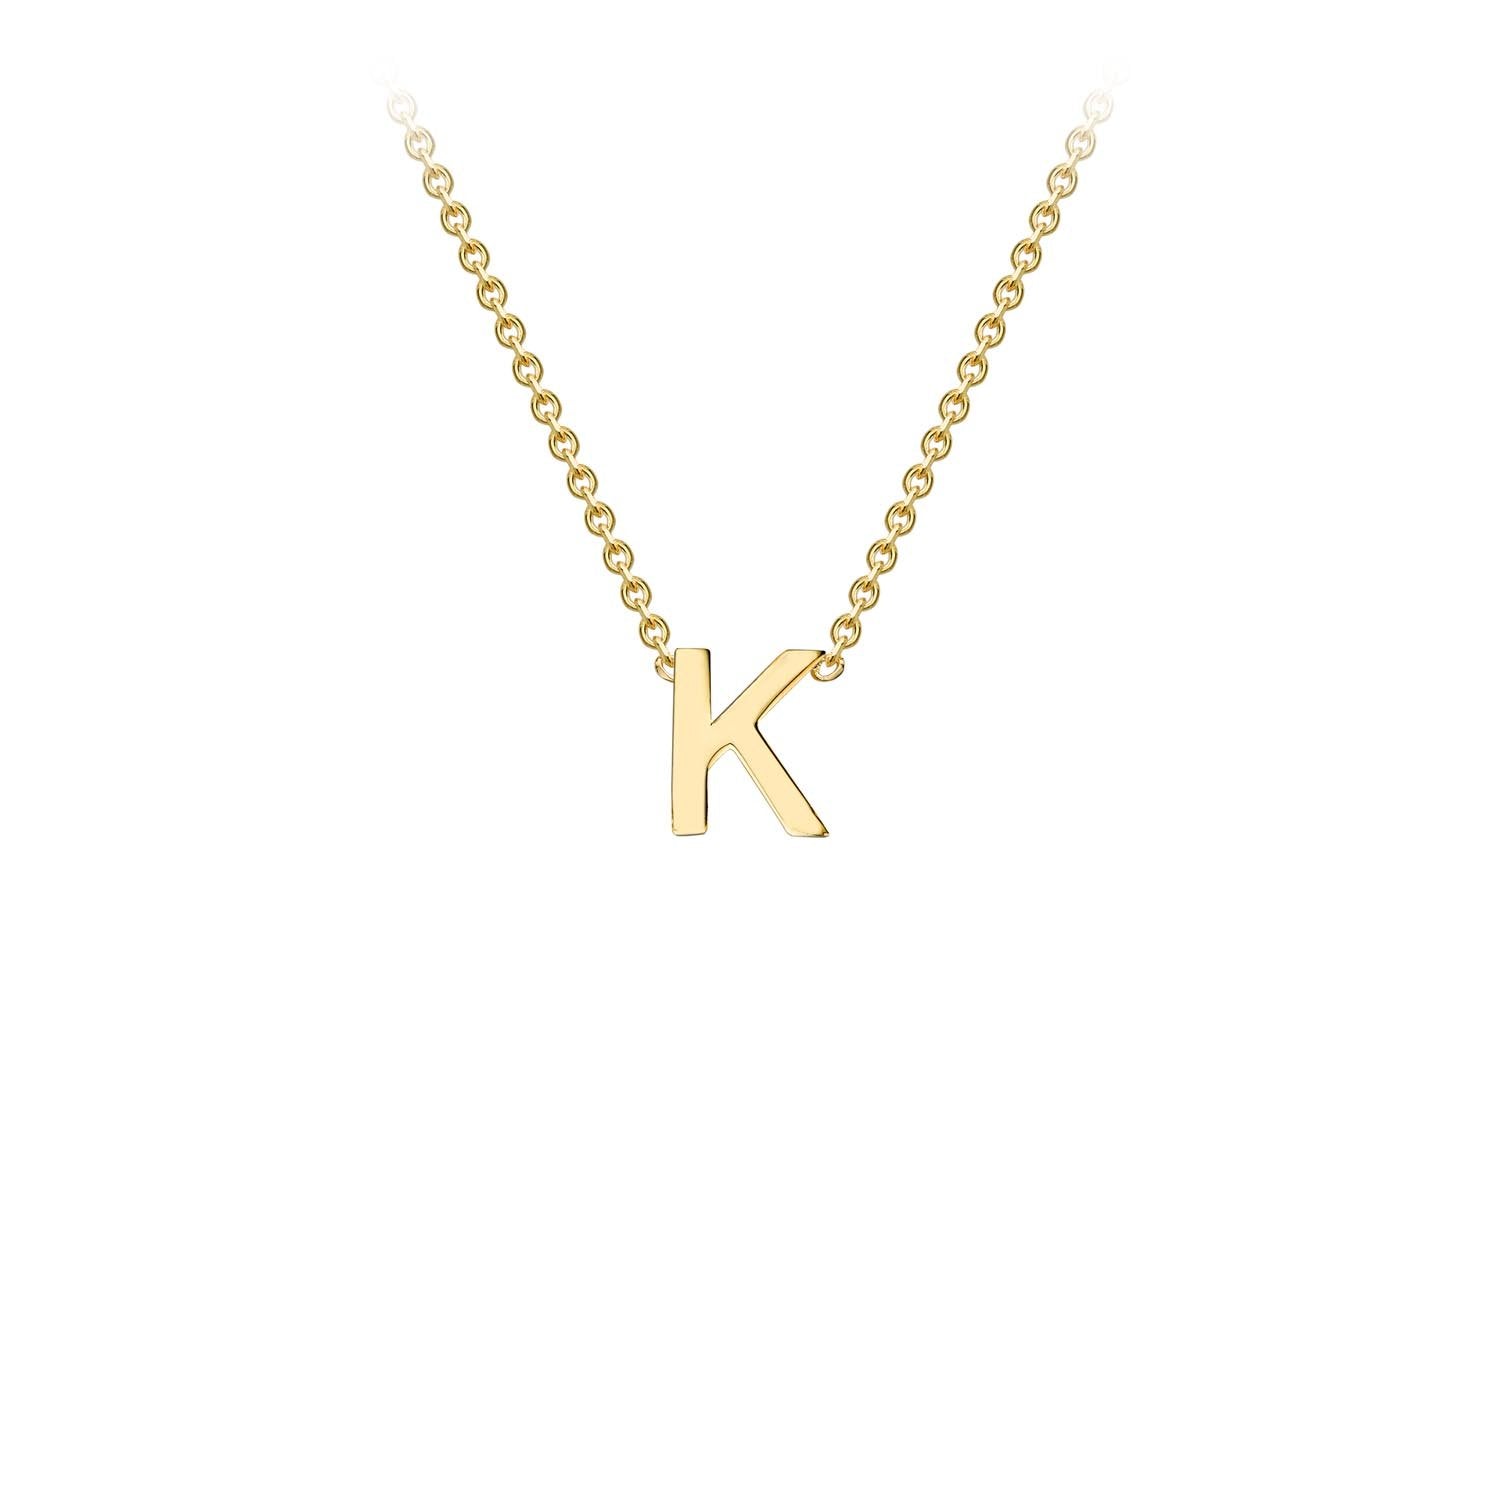 9ct Yellow Gold 'K' Initial Adjustable Letter Necklace 38/43cm